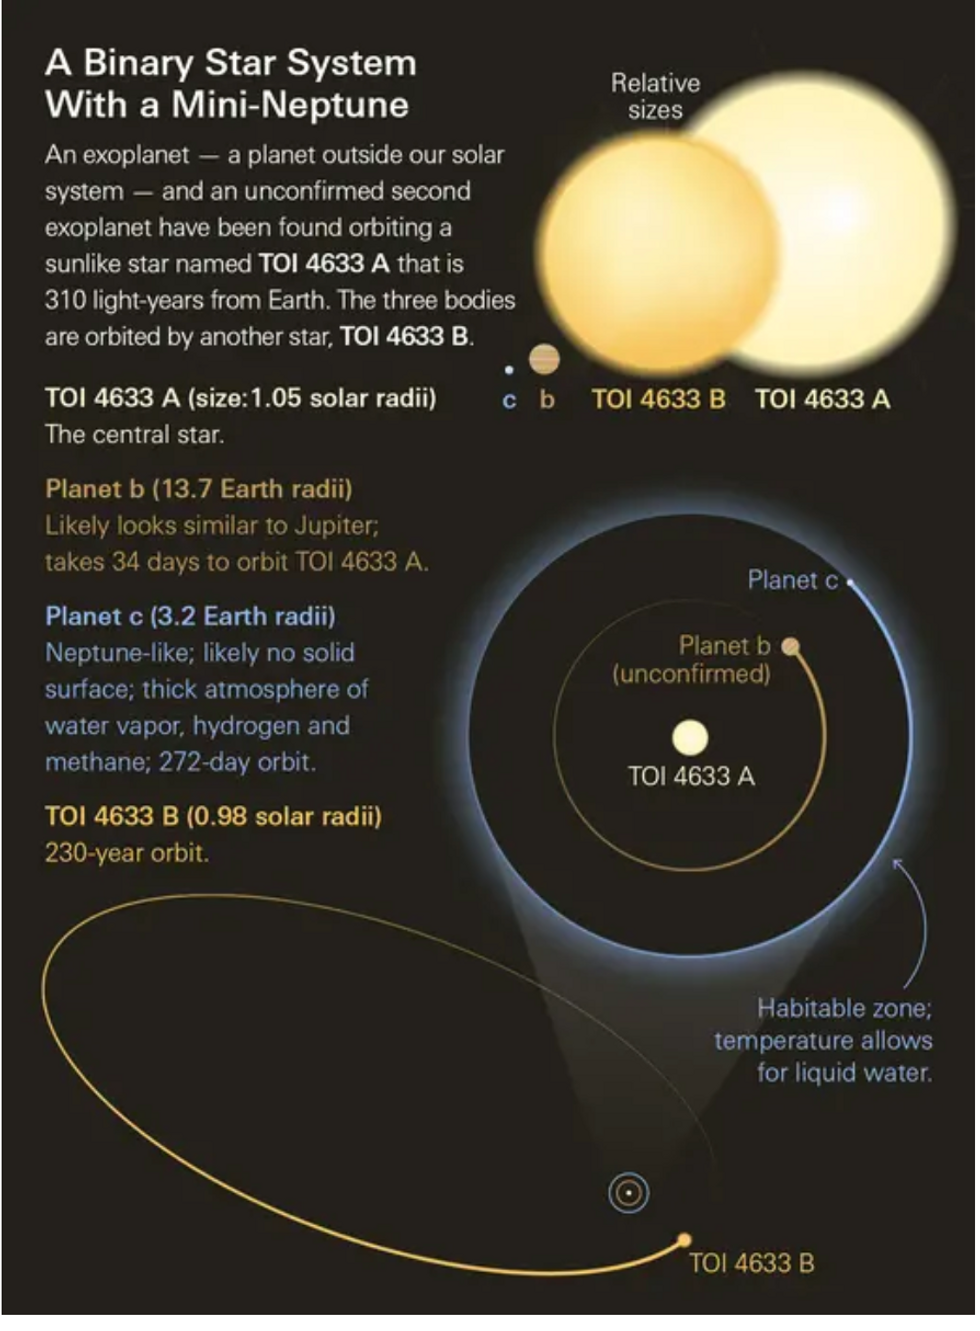 An infographic illustrating new discoveries about a multi-star, multi-planet system